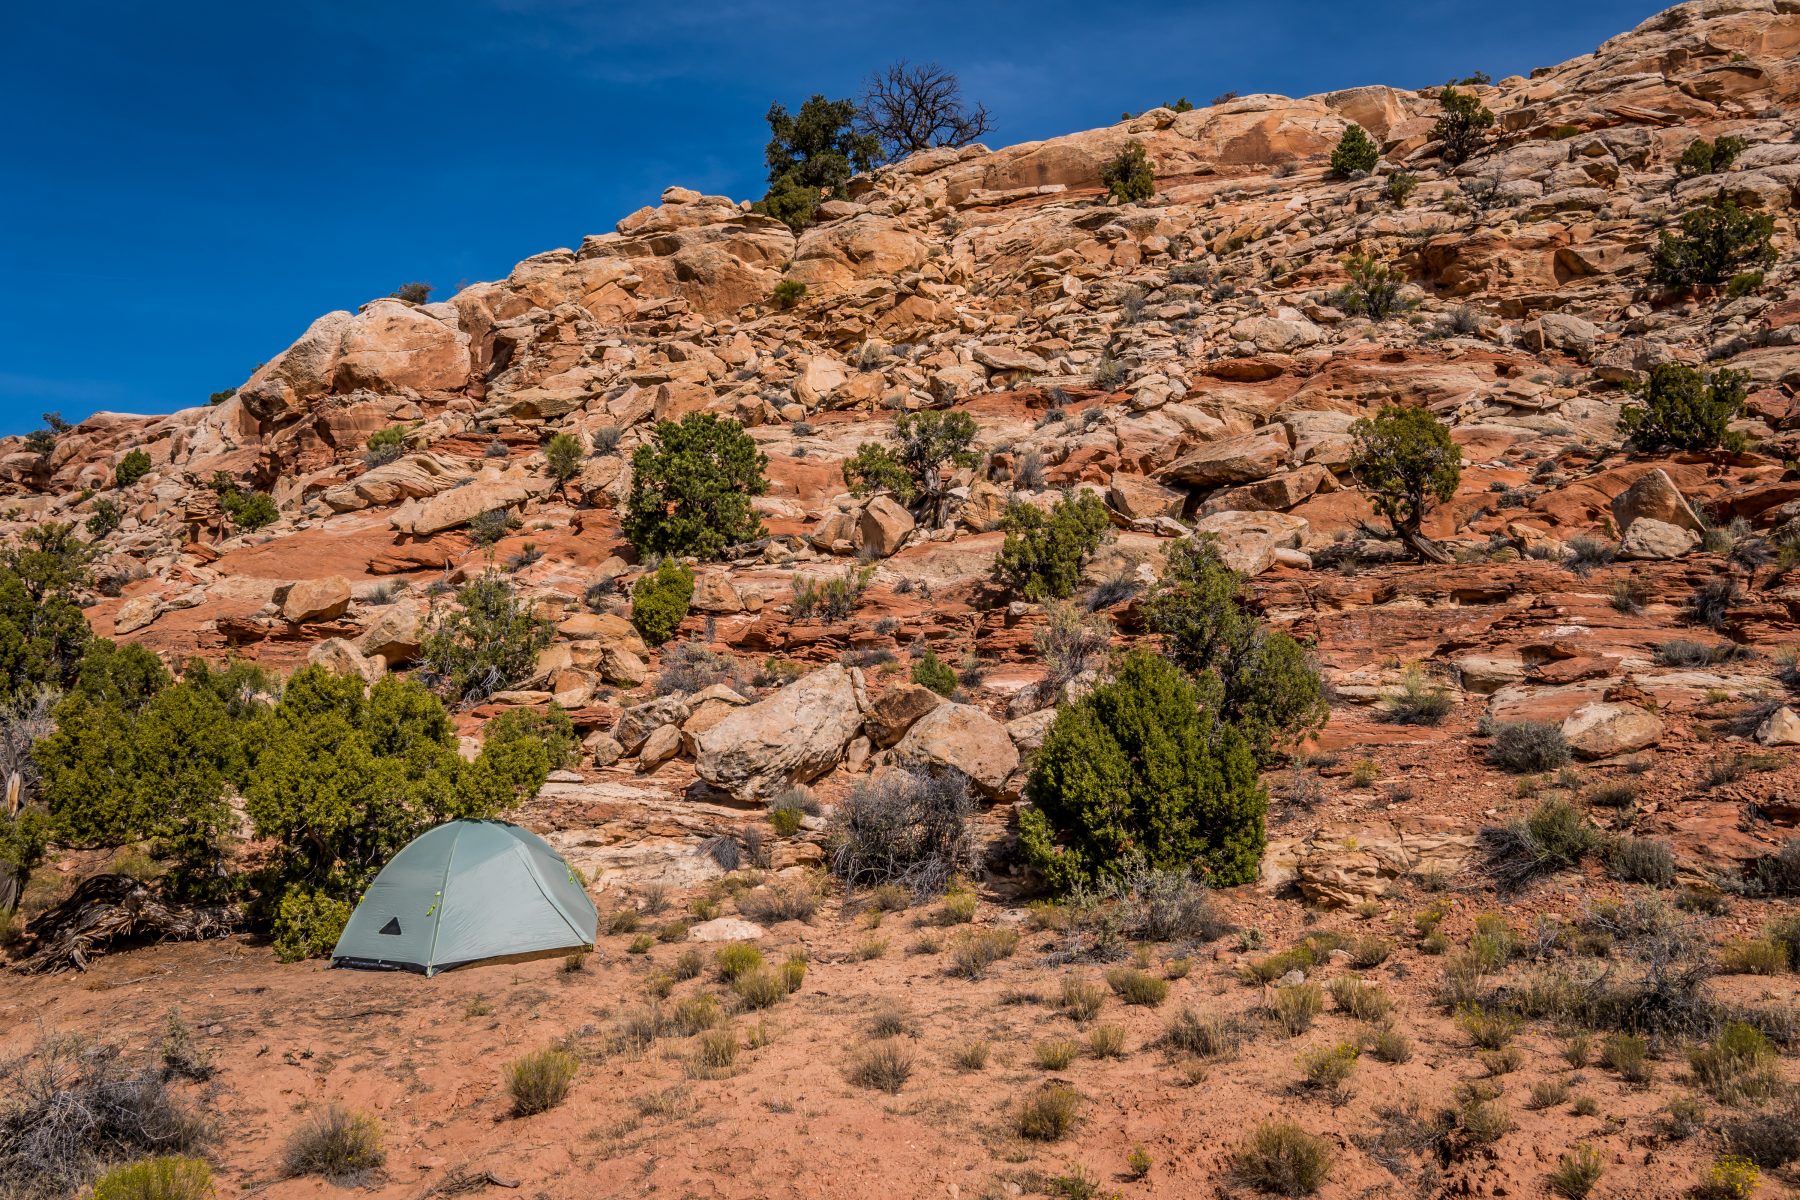 My campsite on BLM land directly next to Arches National Park